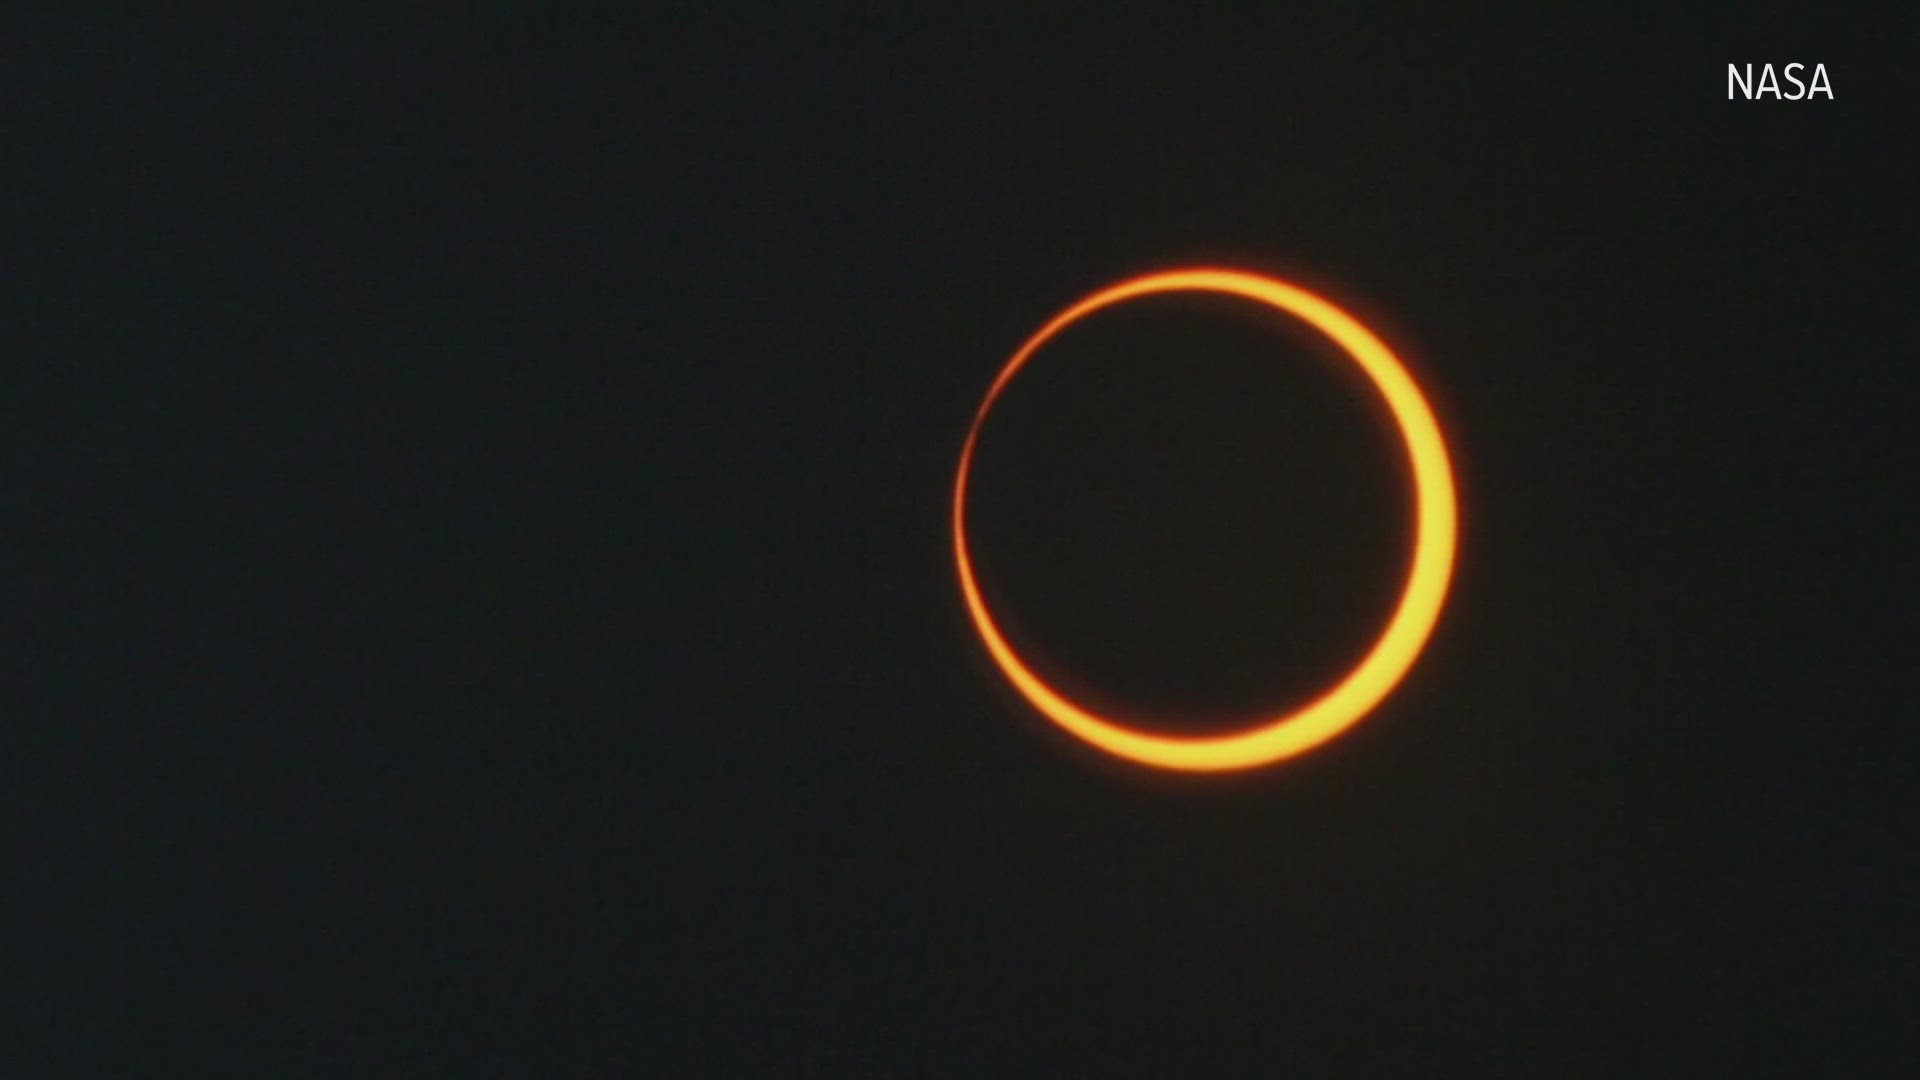 NASA gives some insight into Saturday's 'Ring of Fire' annular eclipse